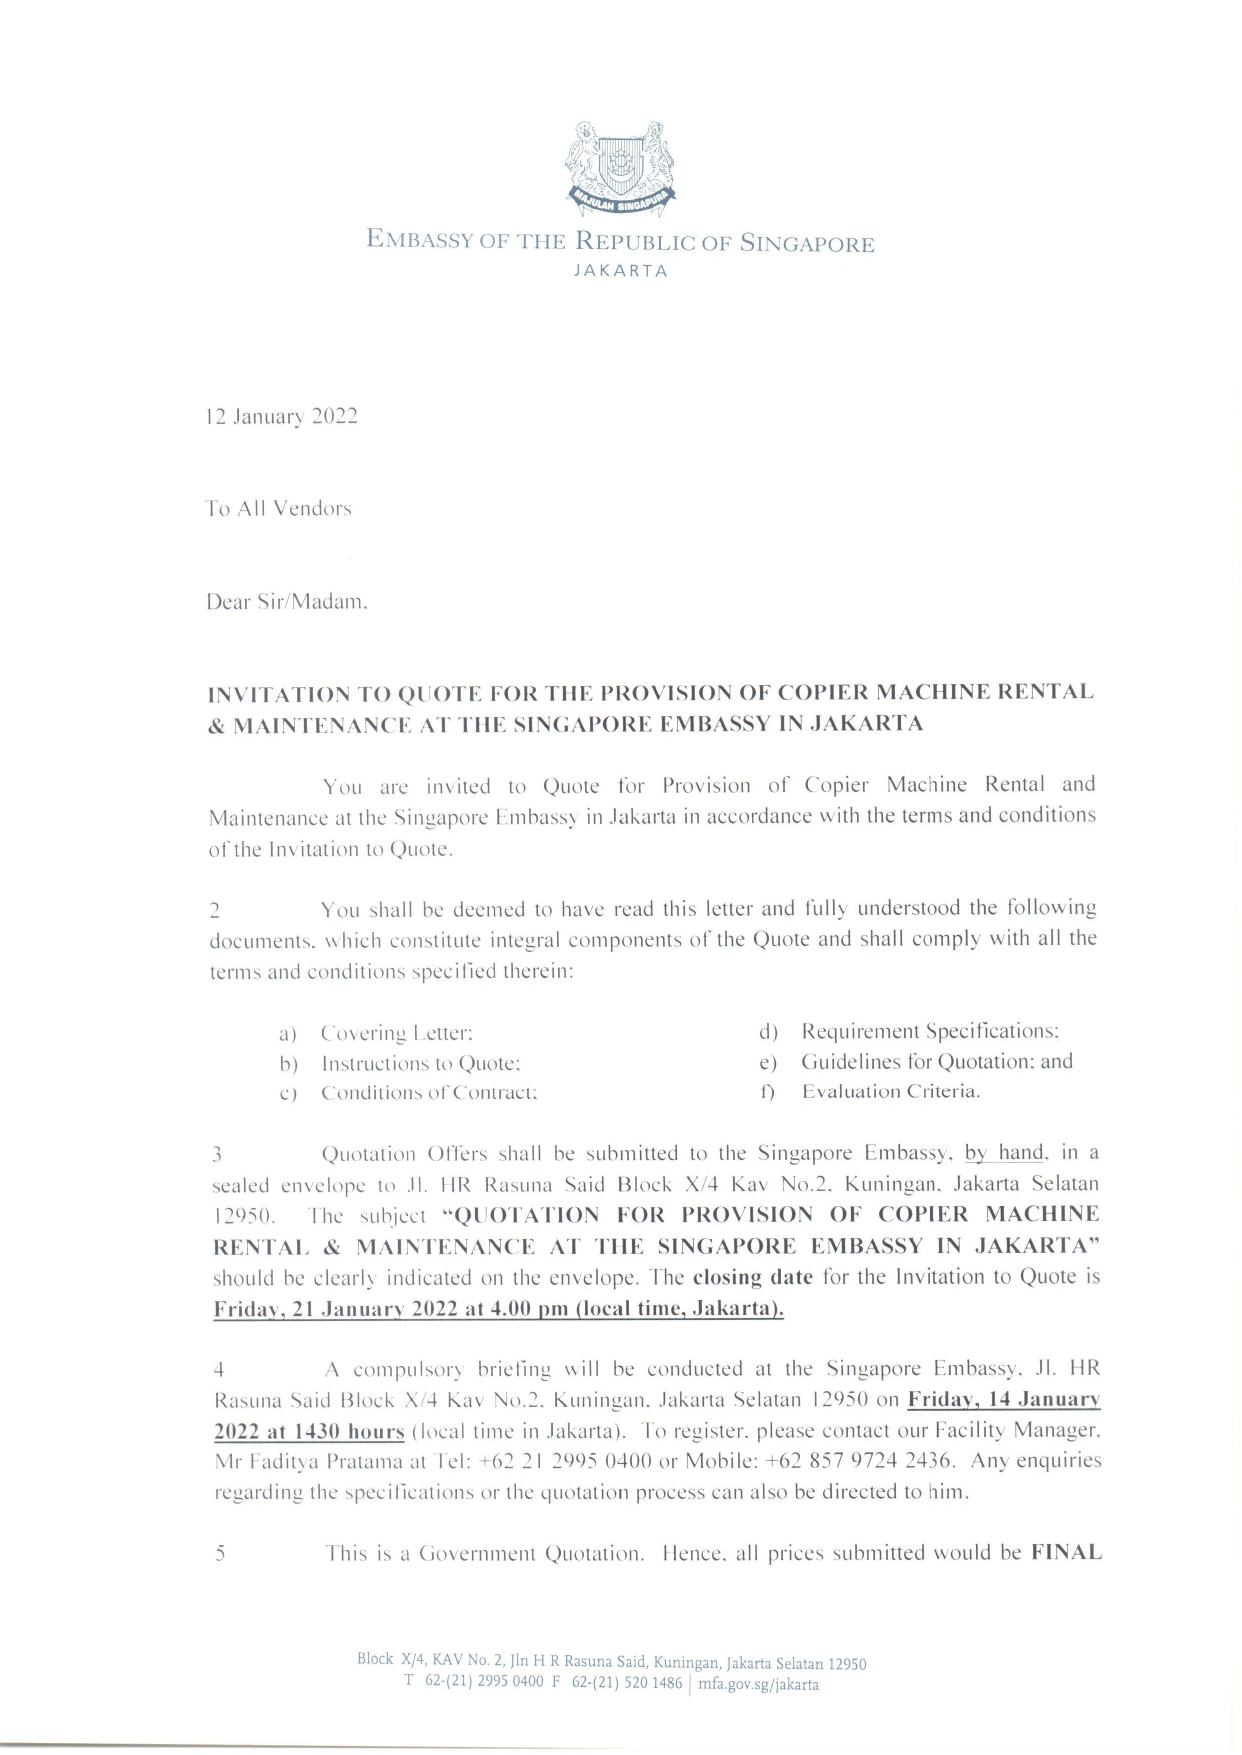 LOI  Provision of  Copier Machine Rental and Maintenance at the Singapopage0001